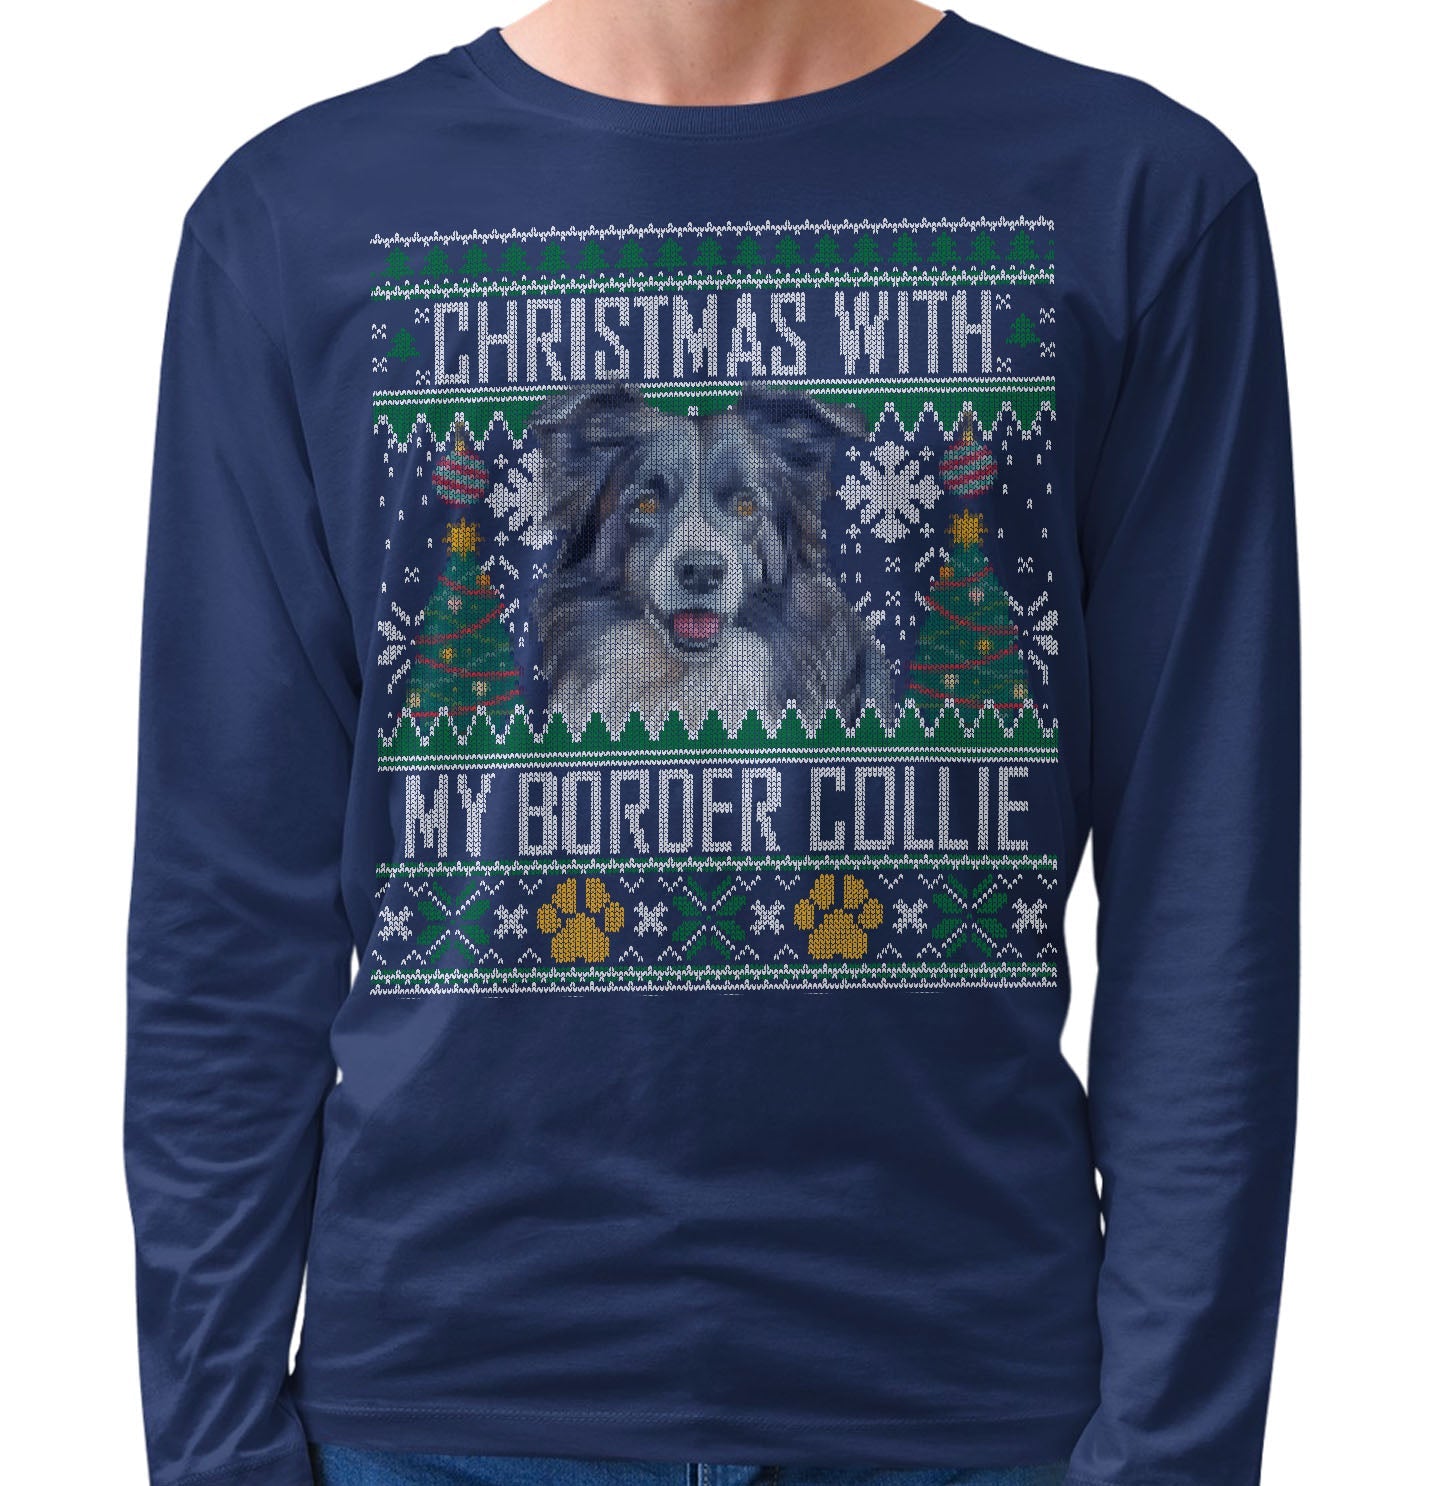 Ugly Sweater Christmas with My Border Collie - Adult Unisex Long Sleeve T-Shirt